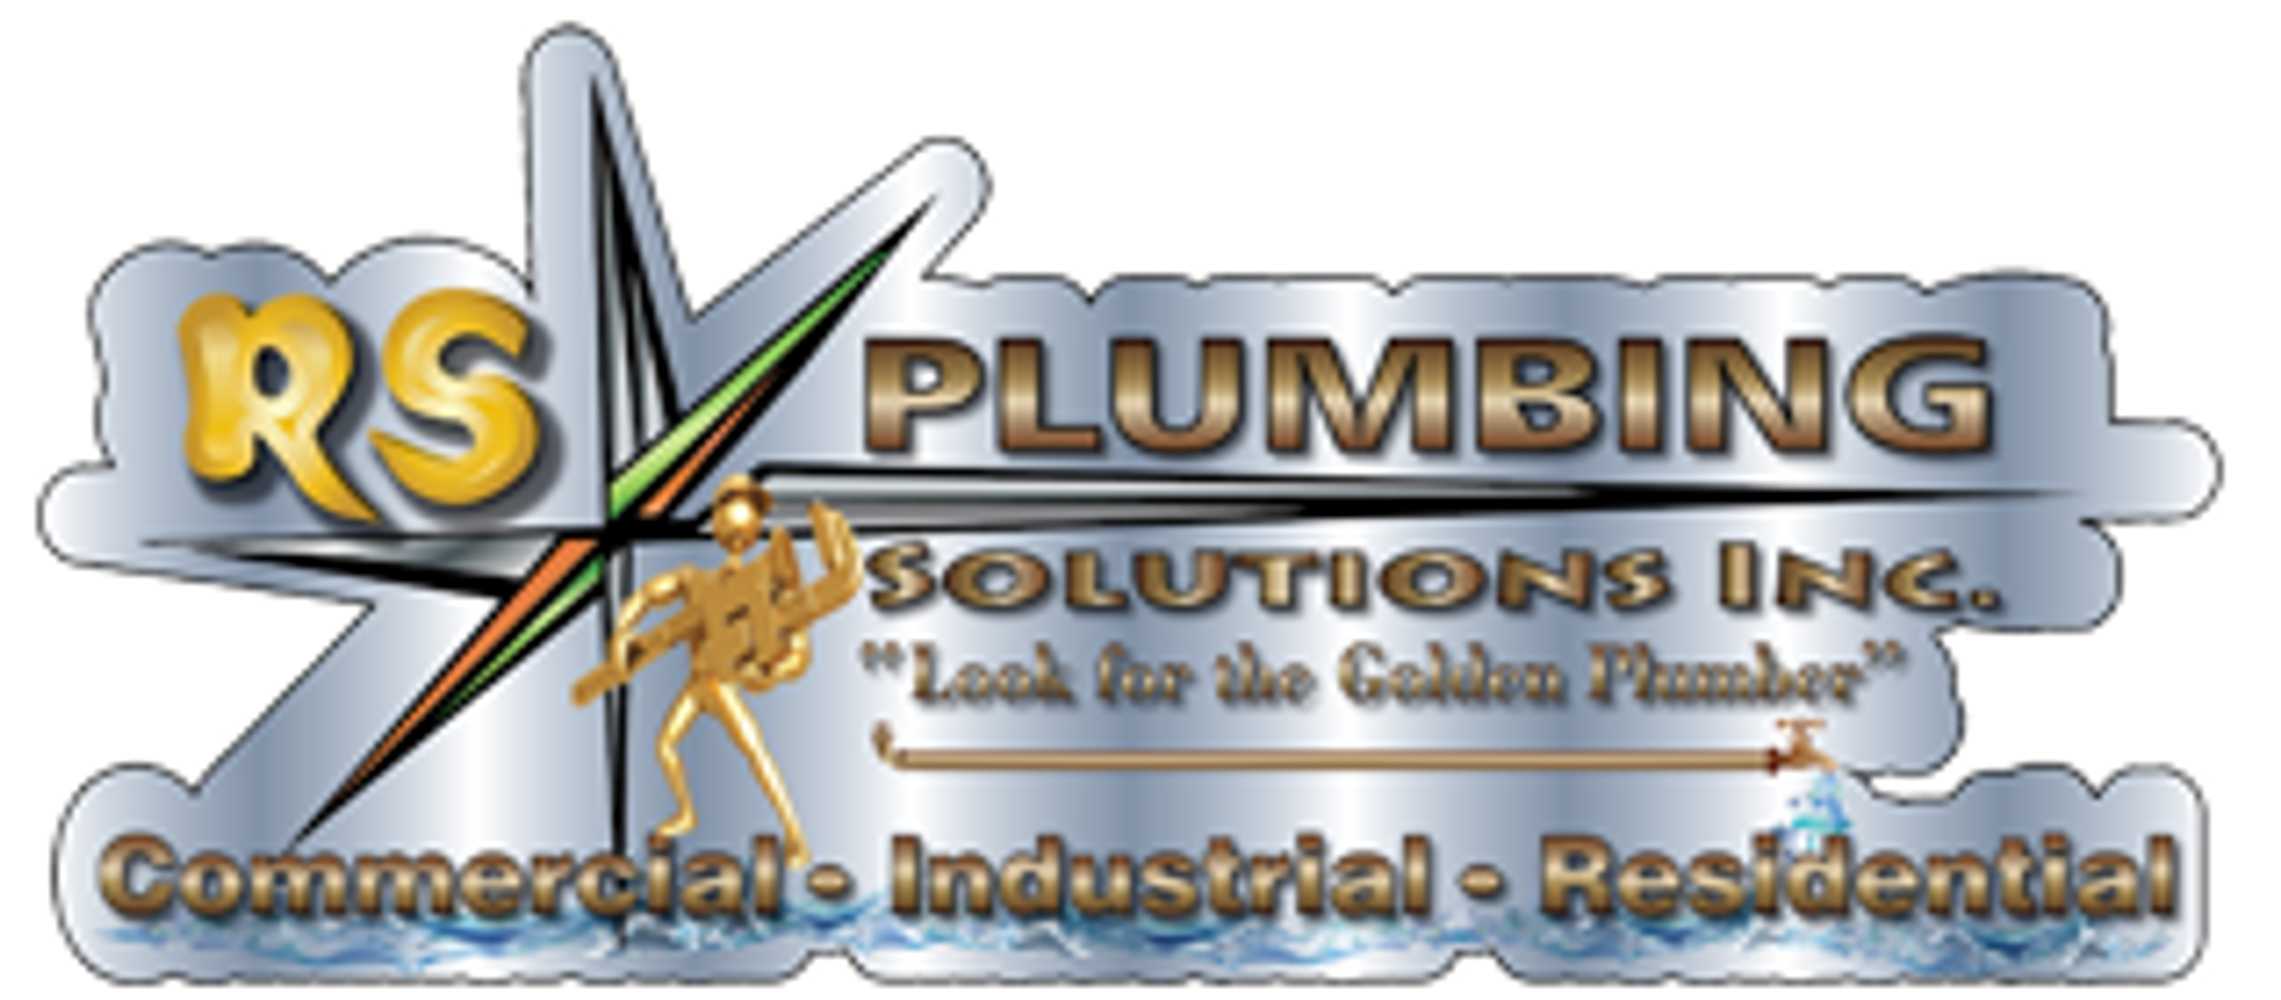 RS Plumbing Solutions, Inc.